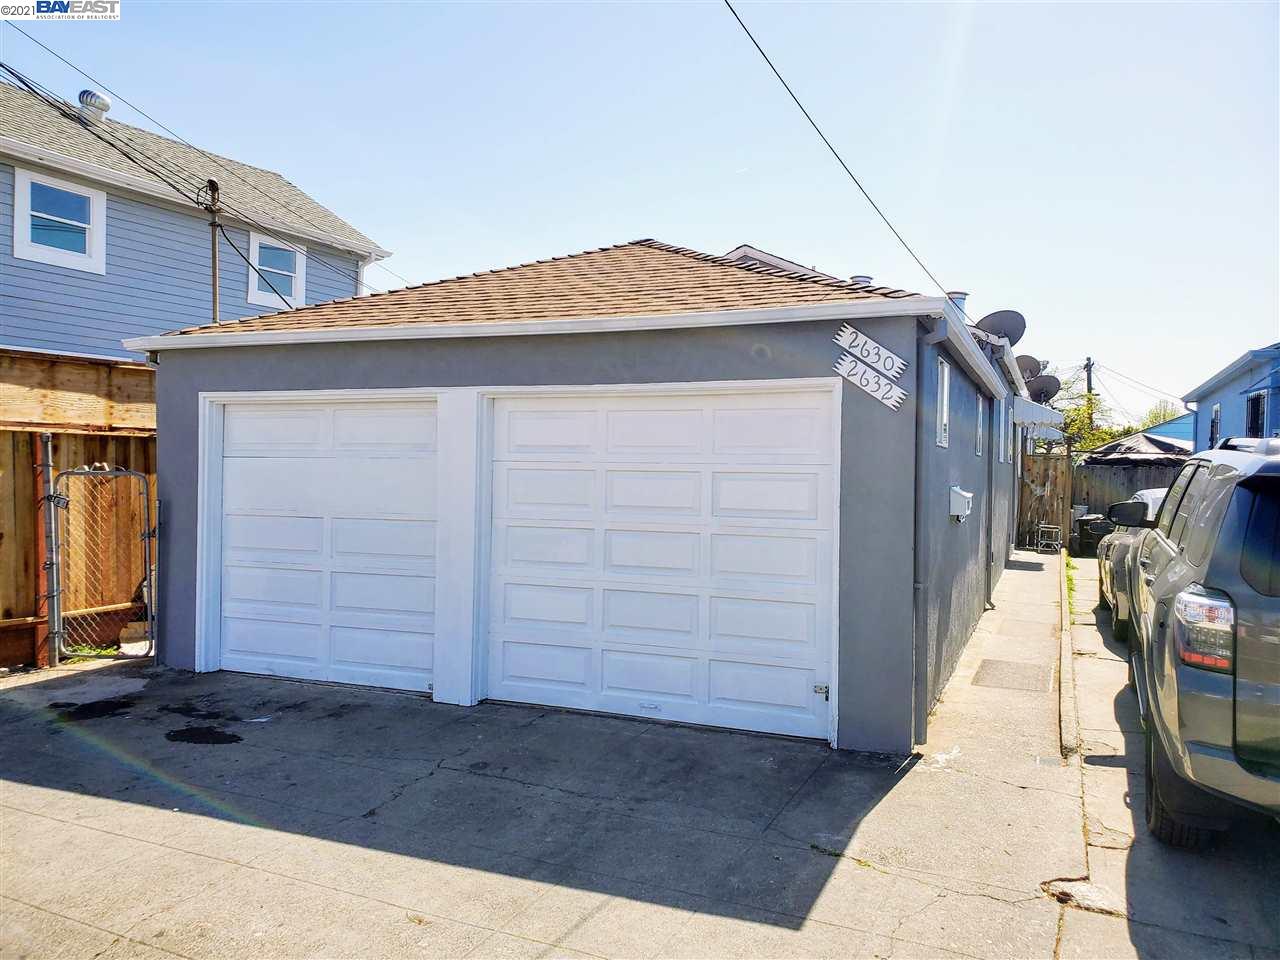 Photo of 2632 38th Ave in Oakland, CA